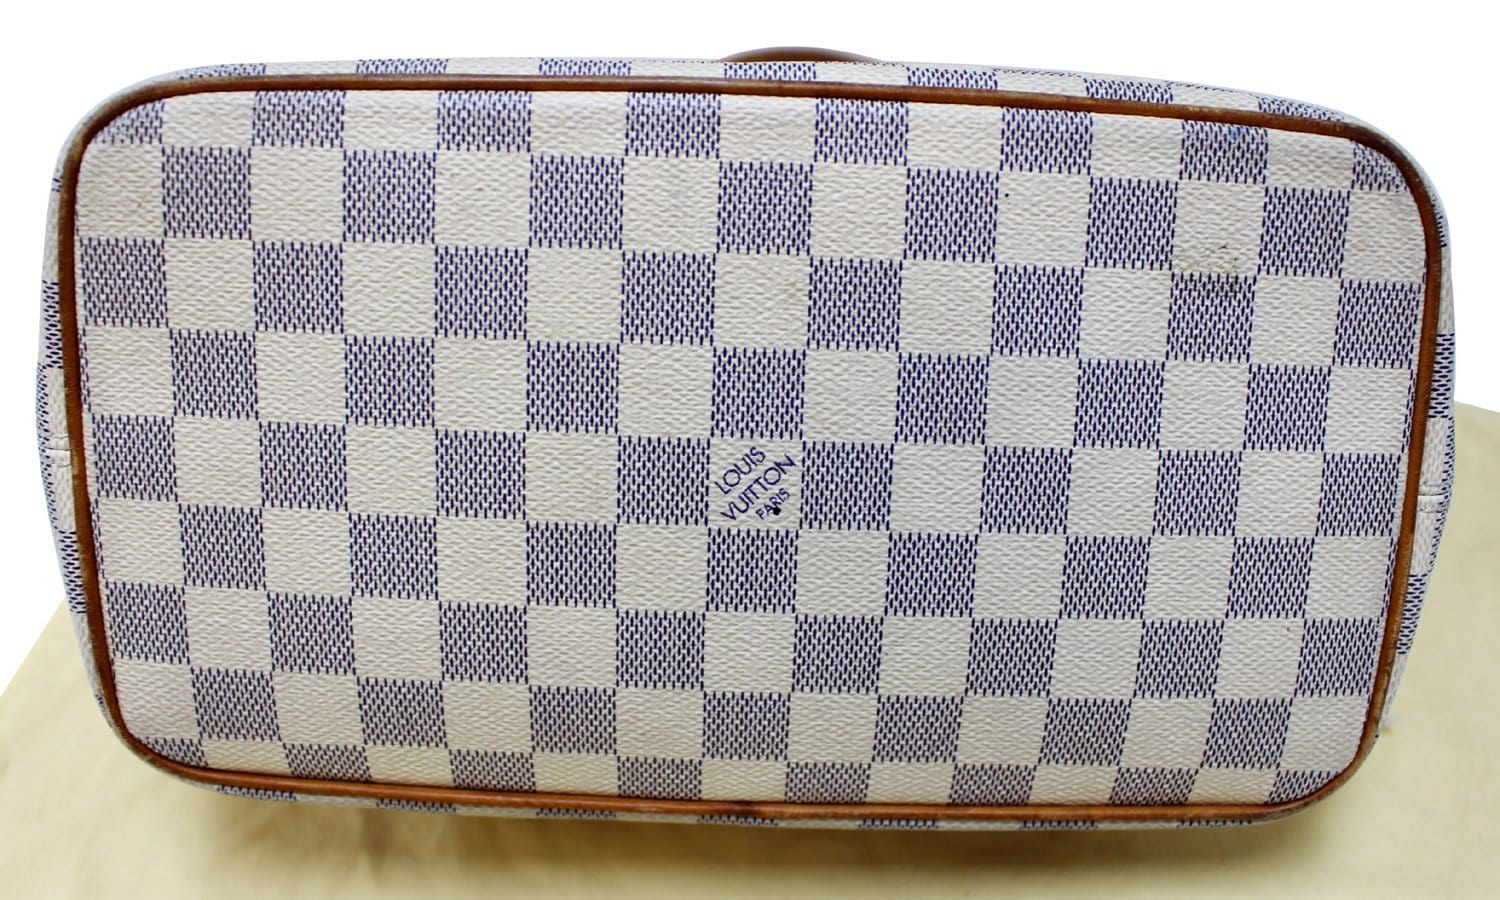 Louis Vuitton - Damier Azur Saleya PM – The Reluxed Collection